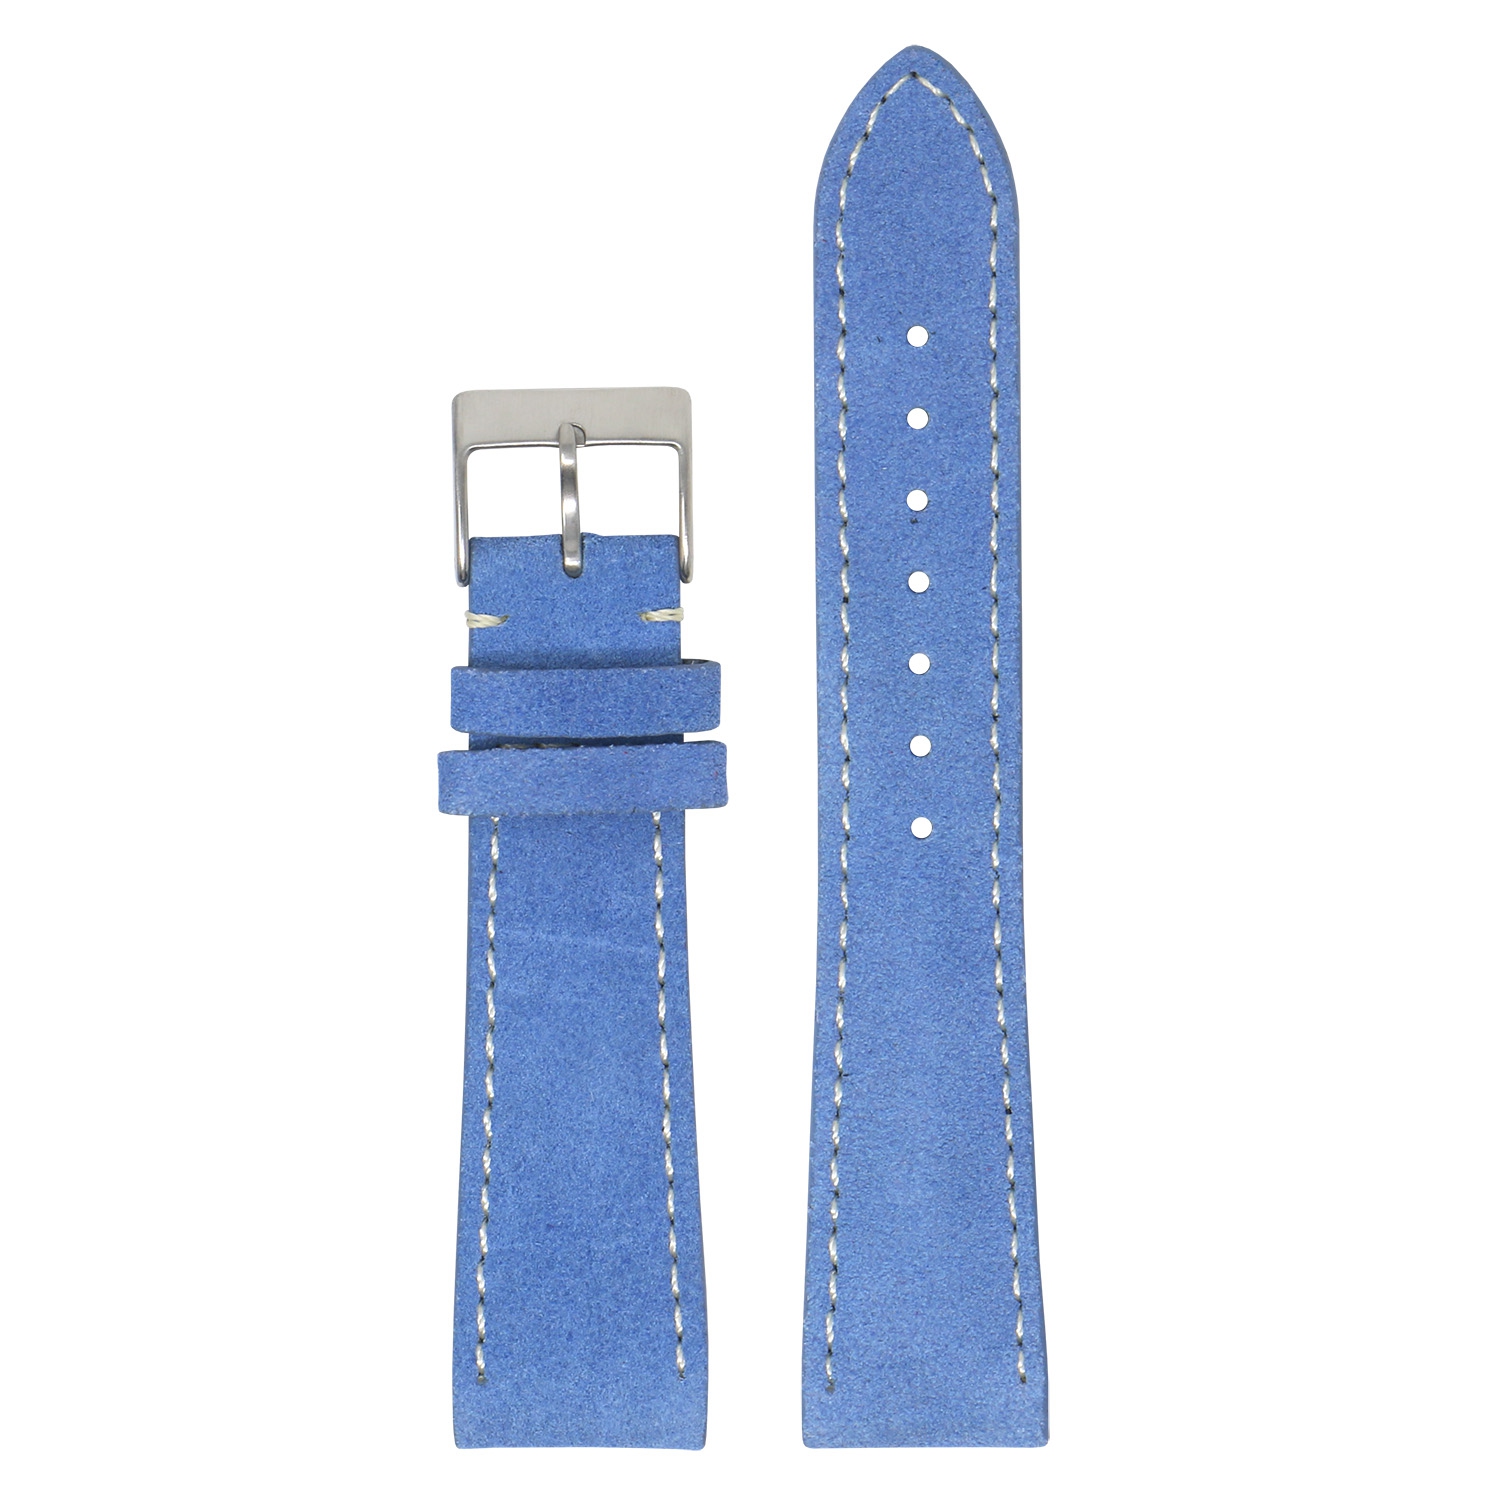 StrapsCo Classic Suede Watch Band Strap (Short, Standard, Long) for Fitbit Charge 4 & Charge 3 - Short - Light Blue